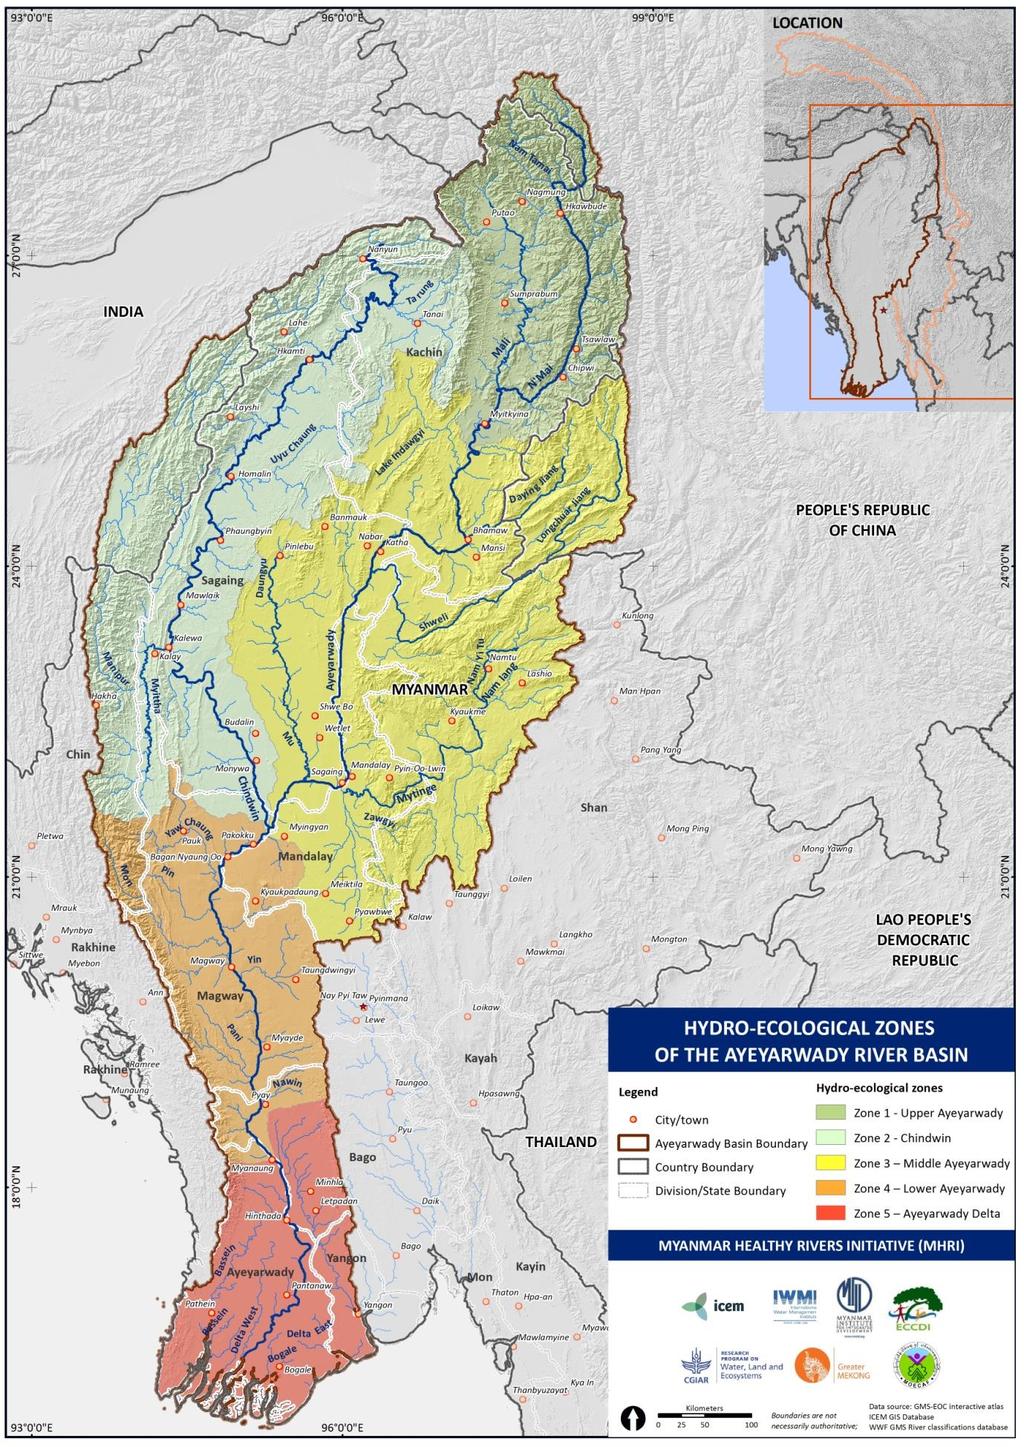 Hydro-ecological zones The Ayeyarwady-Chindwin basin can be classified into five hydroecological zones according to common